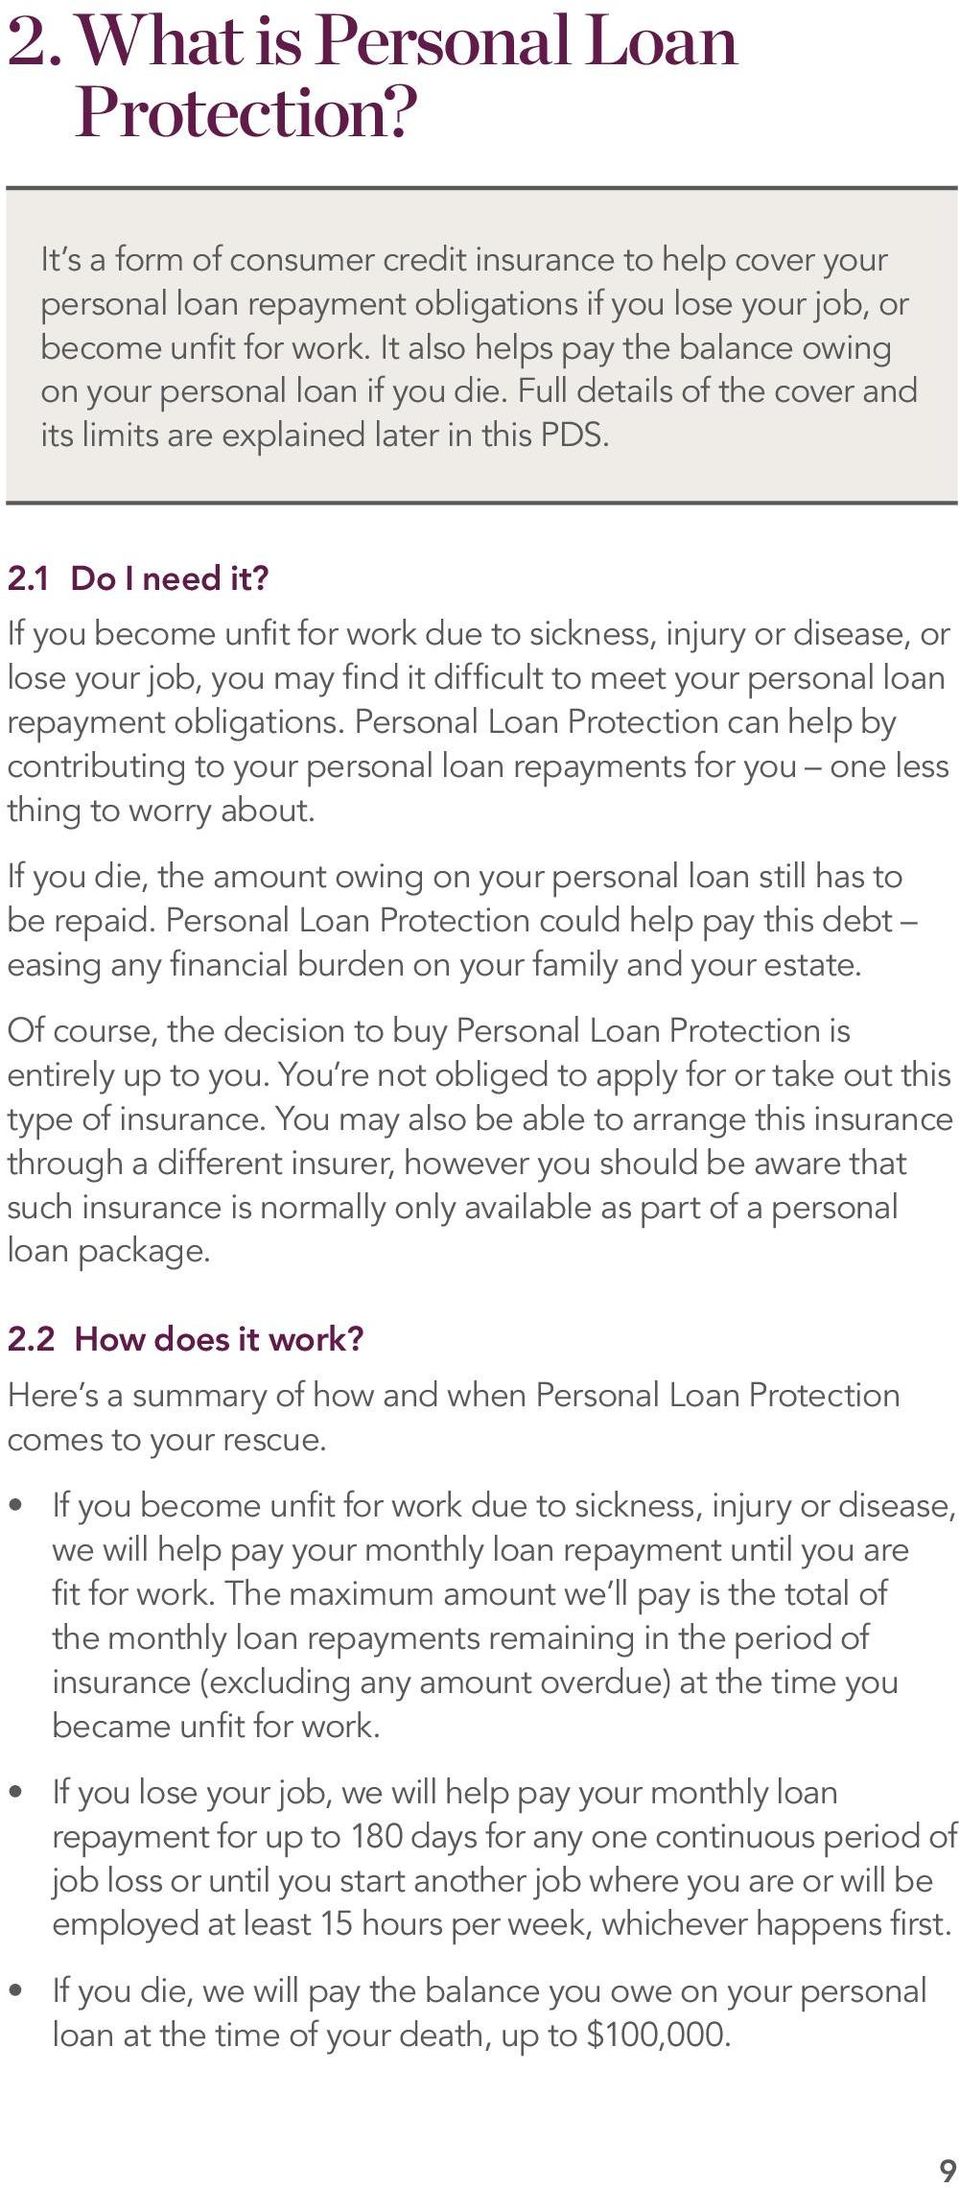 If you become unfit for work due to sickness, injury or disease, or lose your job, you may find it difficult to meet your personal loan repayment obligations.